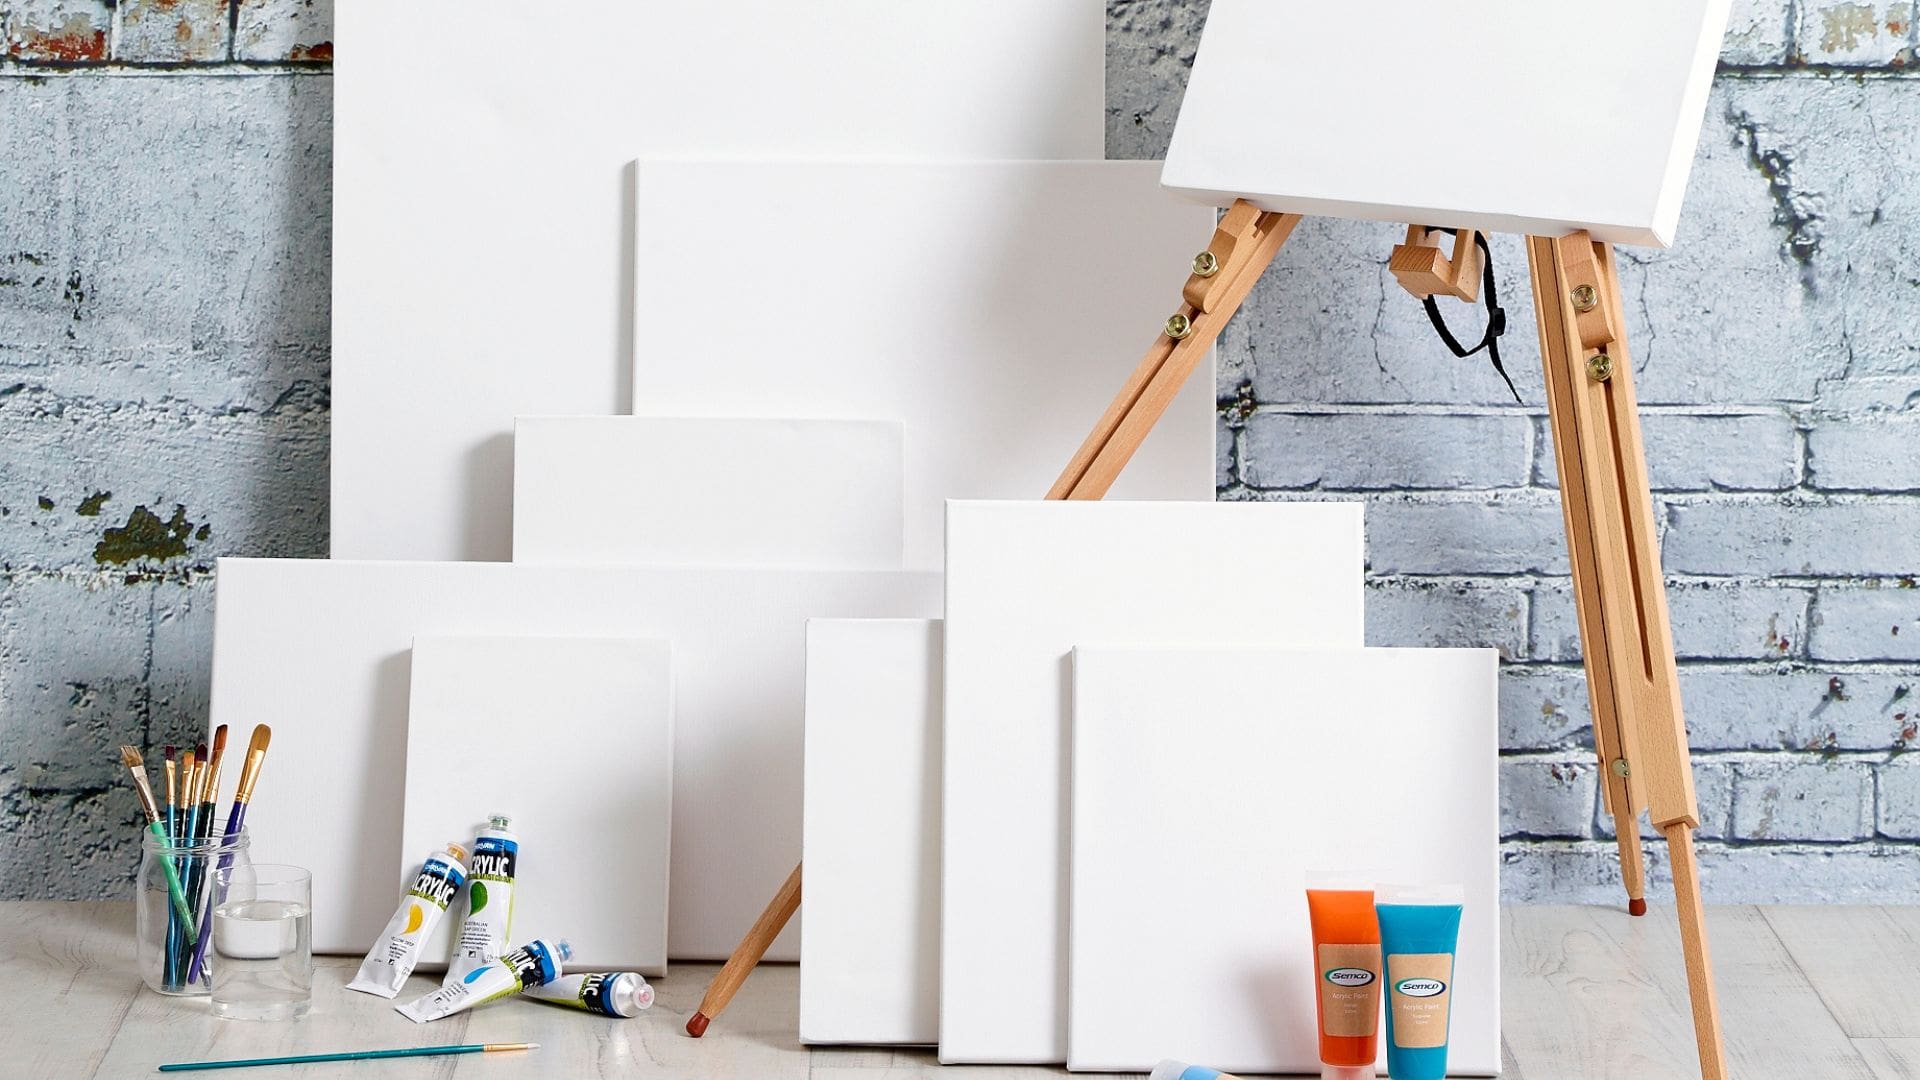 Blank white canvases in assorted sizes